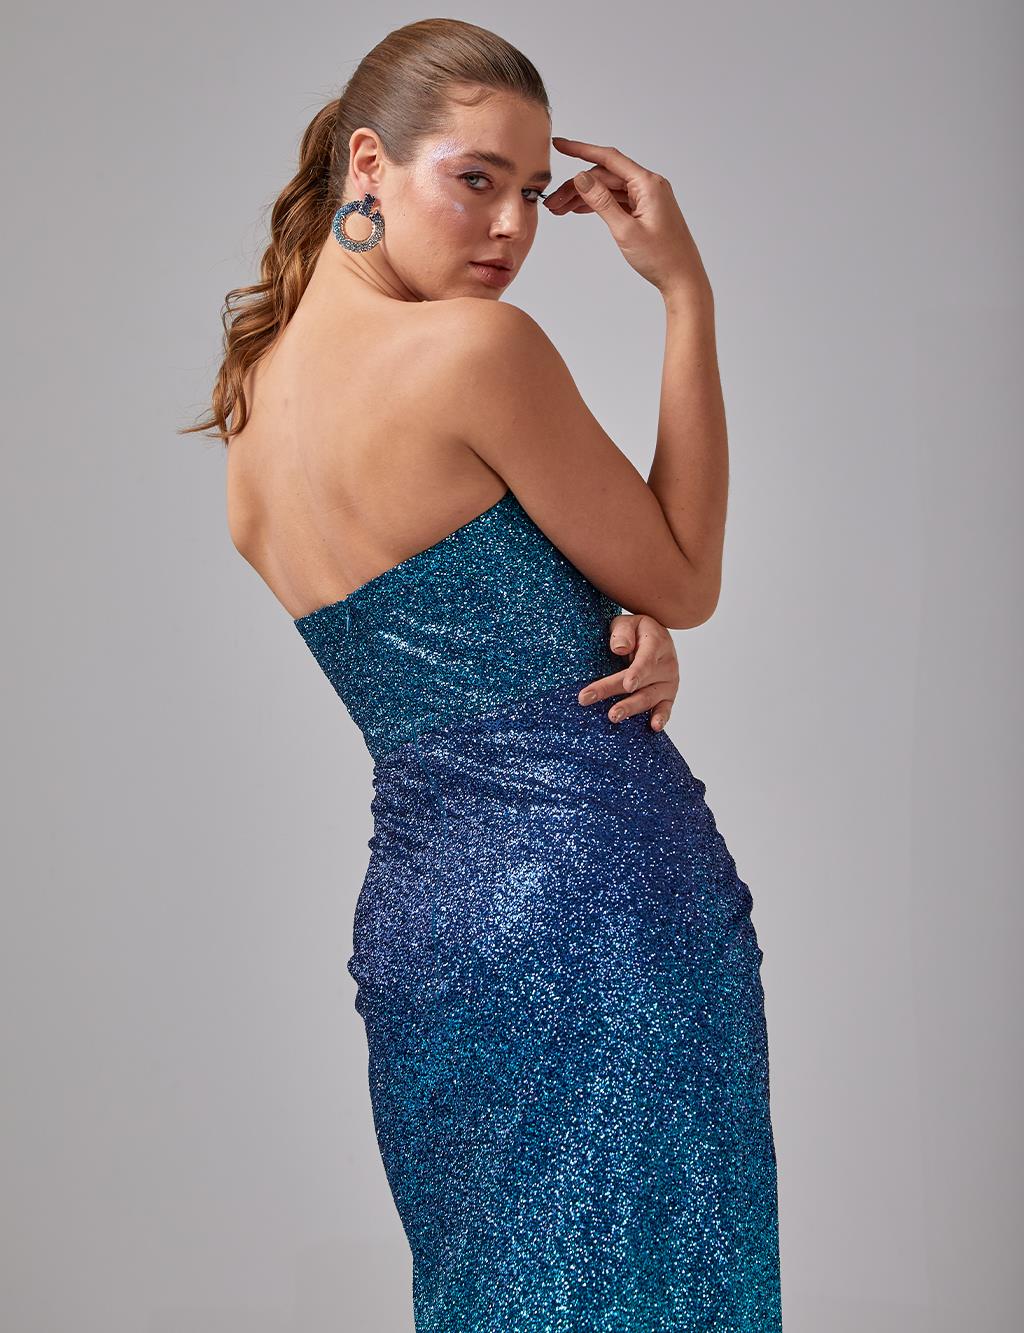 Sparkling Strapless Evening Dress Turquoise